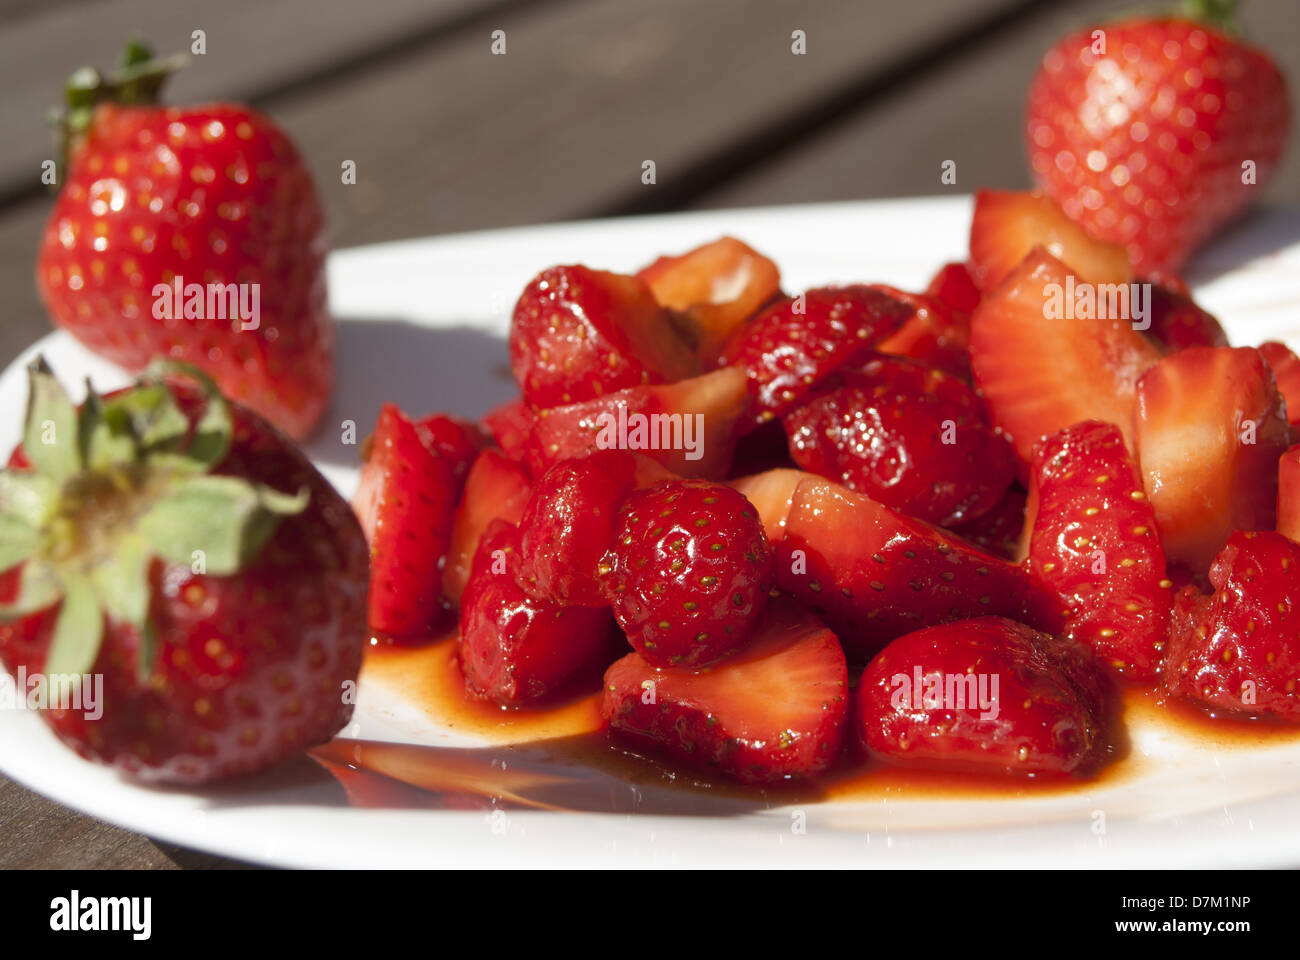 healthy fresh fruit and wellness:fruit salad of strawberries Stock Photo